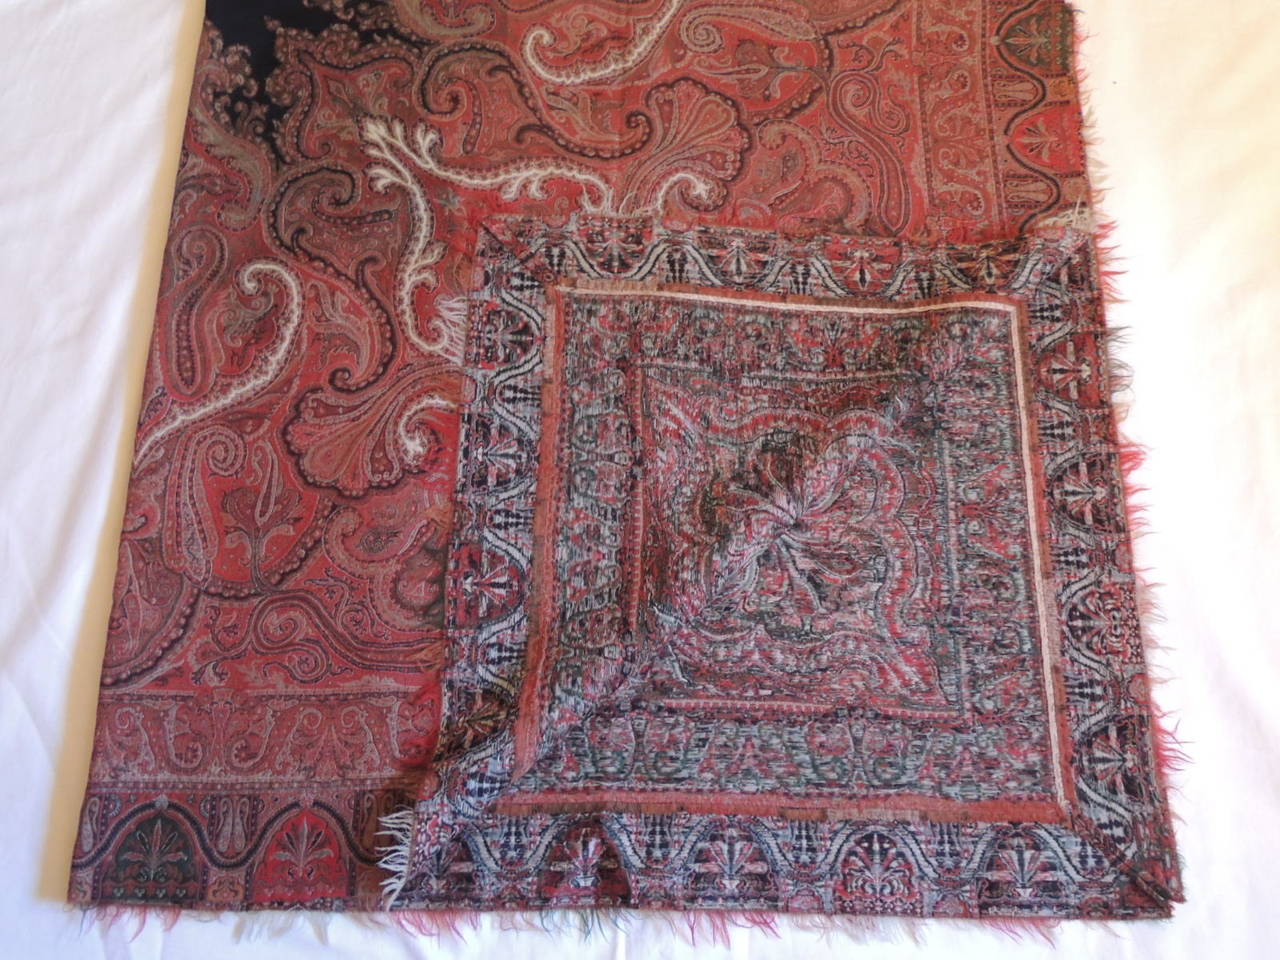 Hand-Crafted 19th Century Kashmir Paisley Shawl Tapestry